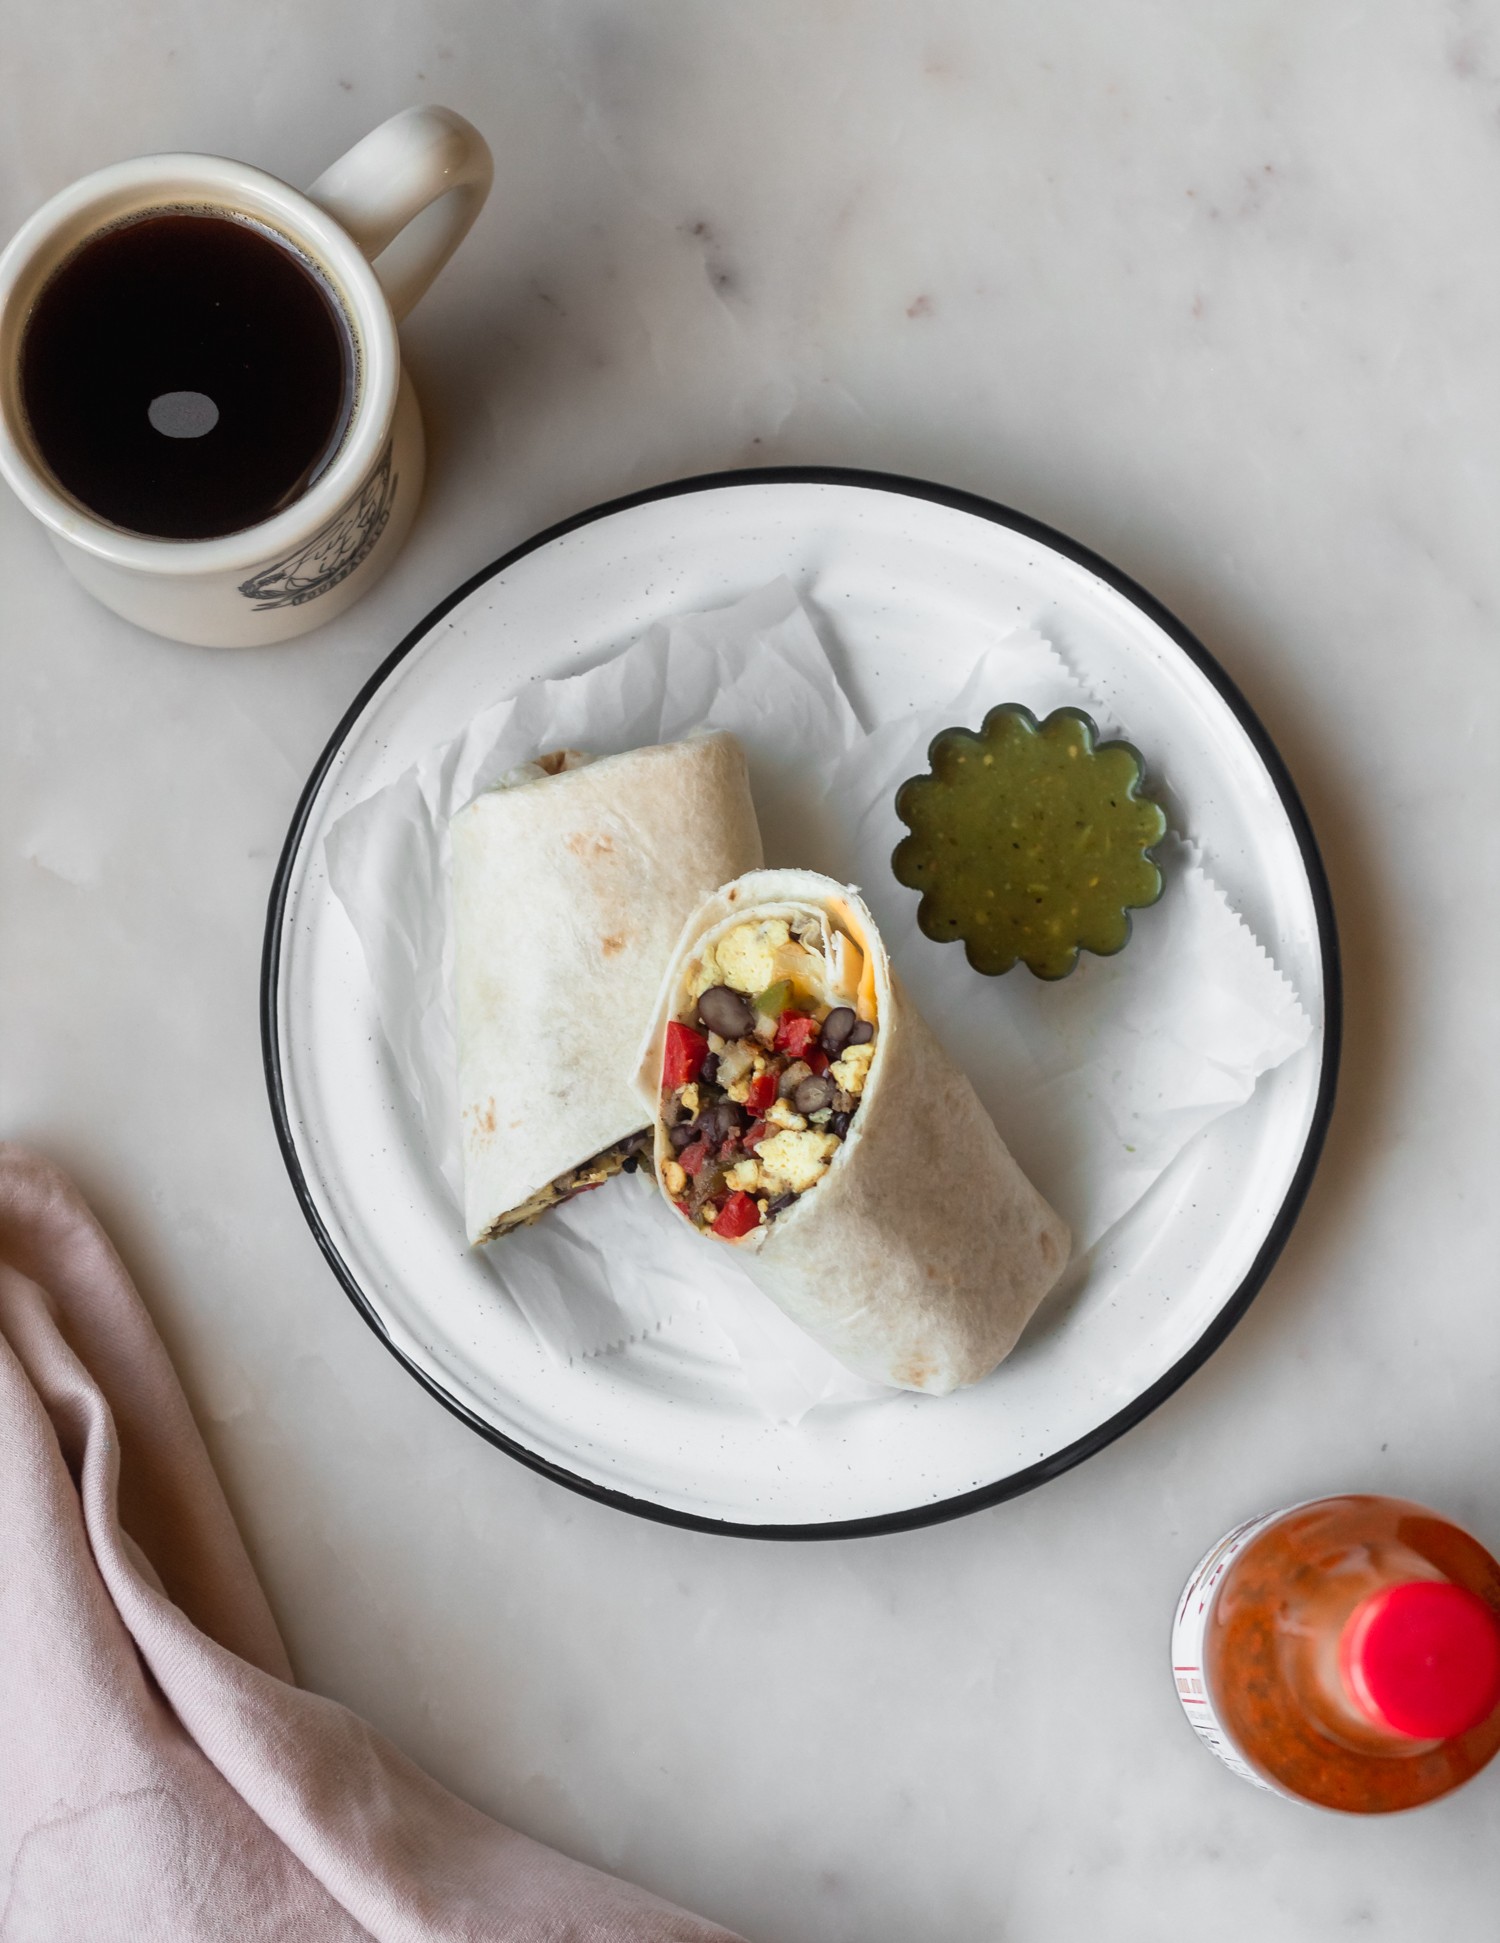 An overhead shot of a white plate with a breakfast burrito on top next to a side of salsa. Next to the burrito is a cup of coffee, hot sauce, and a pink napkin